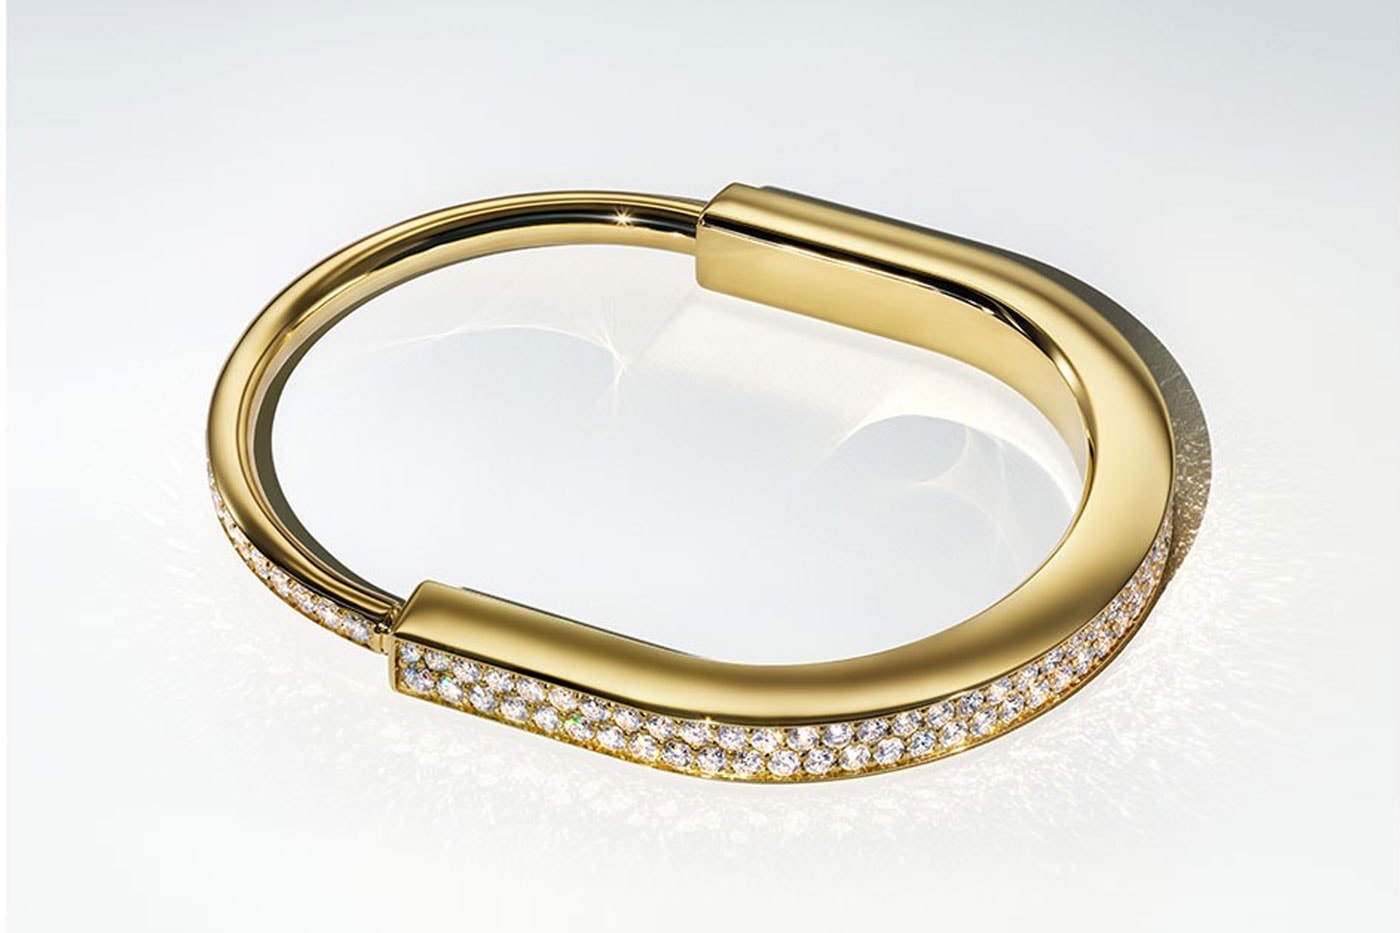 Tiffany and co lock bangle bracelet white yellow rose gold pave diamonds love release info date price